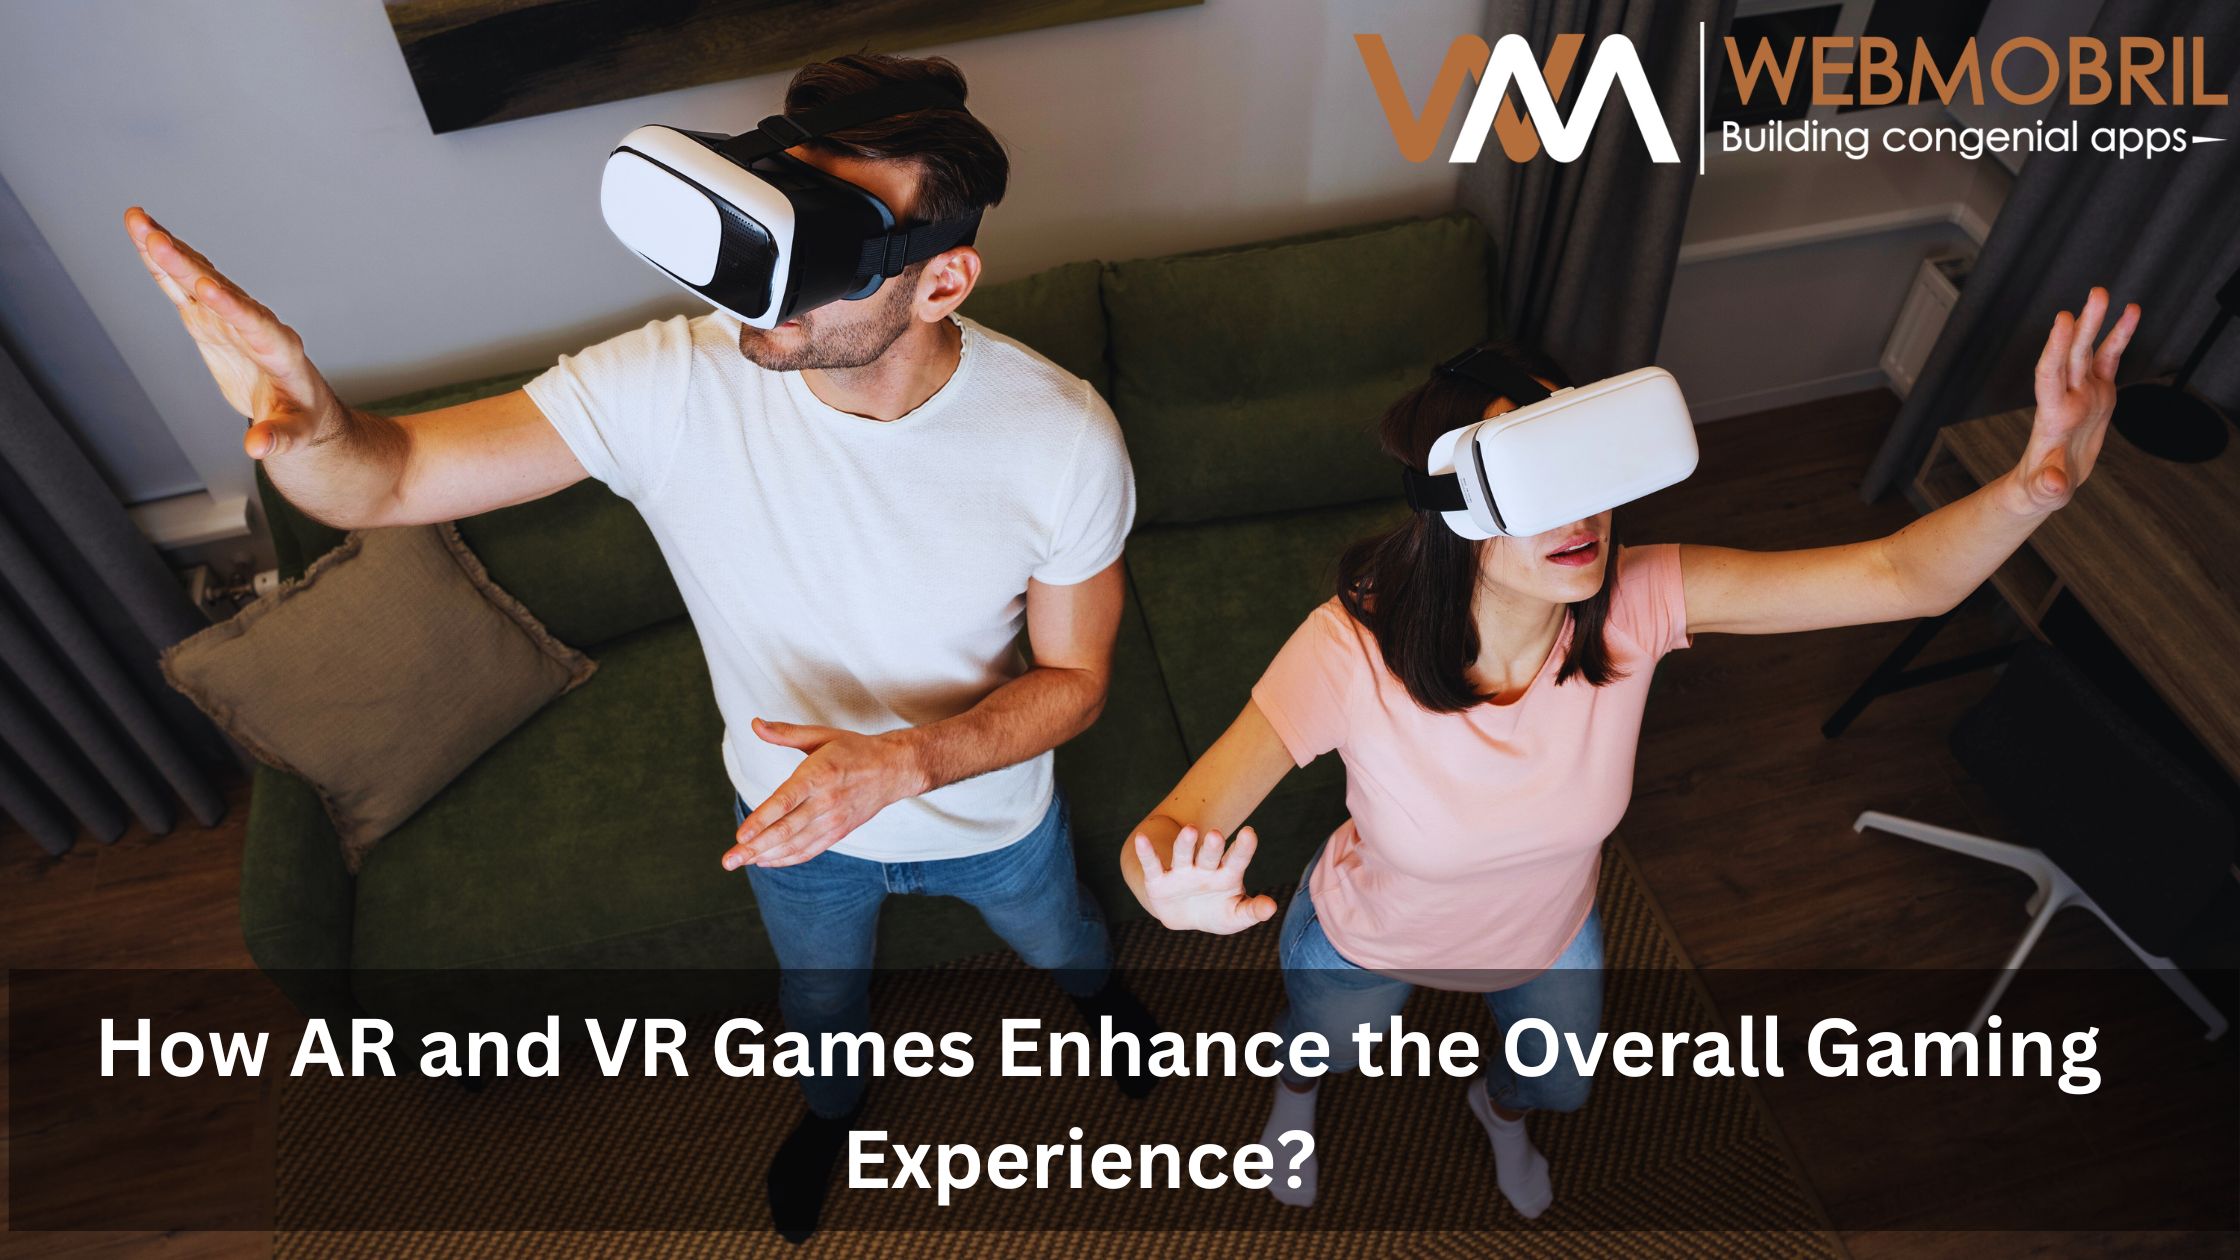 How AR and VR Games Enhance the Overall Gaming Experience?